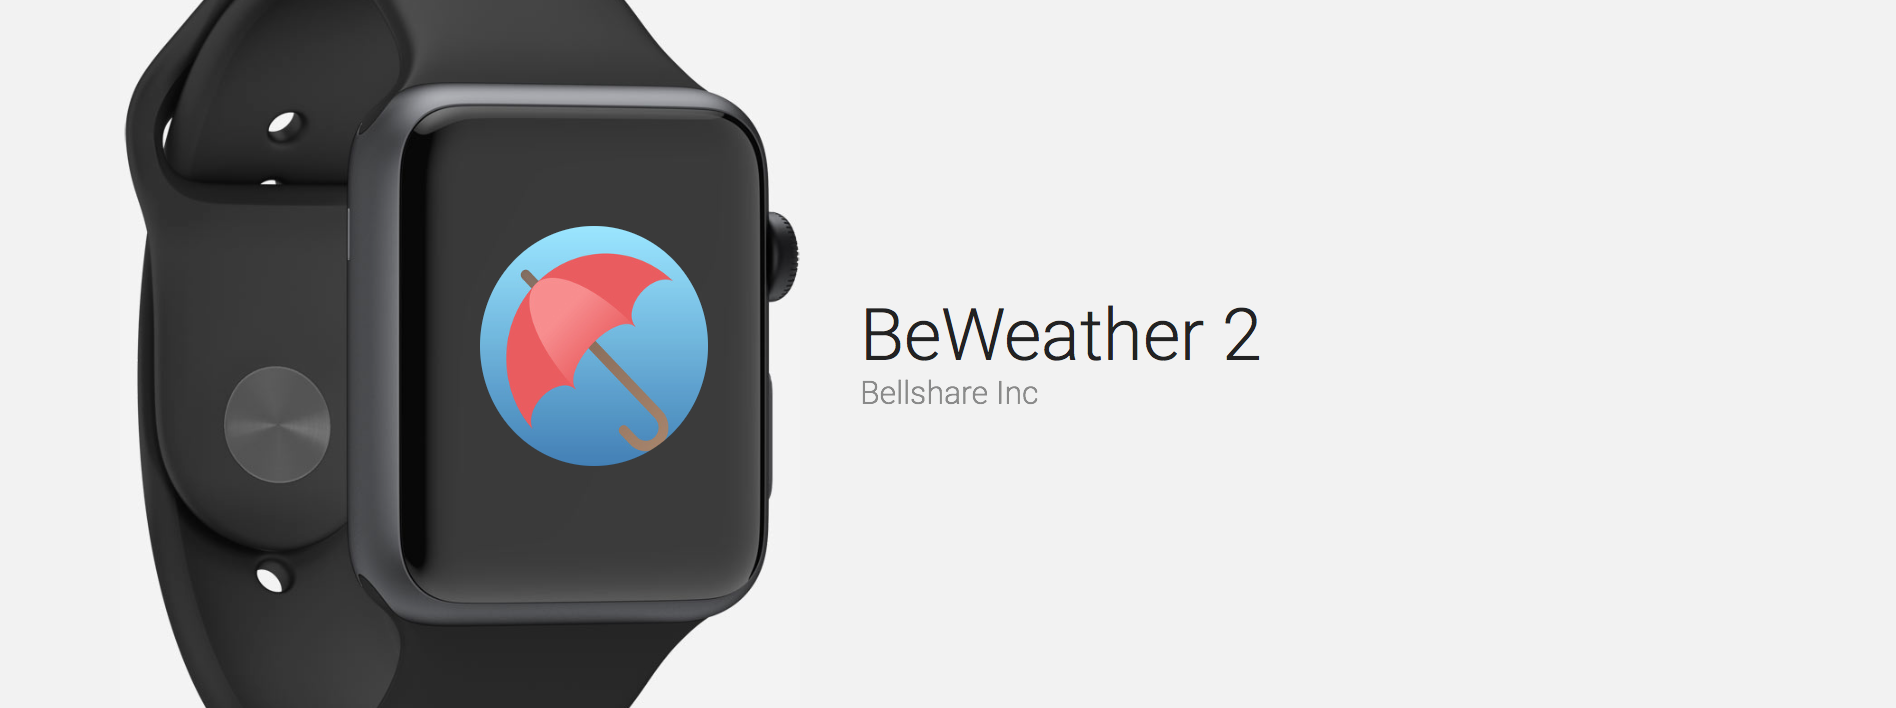 BeWeather 2 Offers A Fully Customizable Weather Complication And More